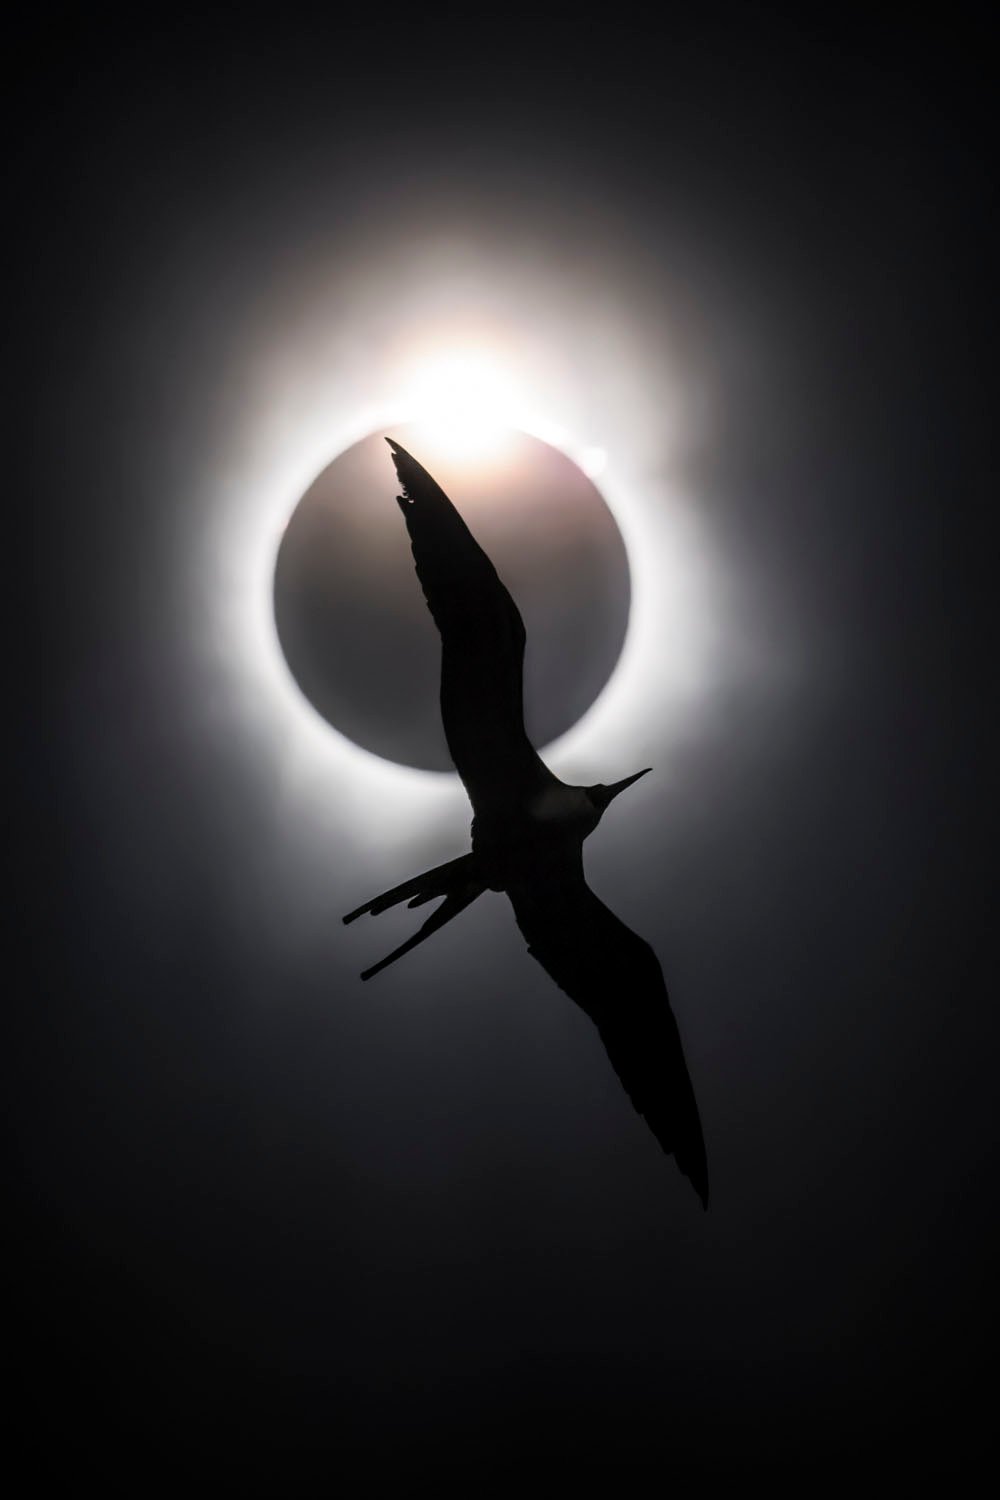 A silhouette of a bird flying in front of a solar eclipse, creating a dramatic image with the bird's wings outstretched against the glowing halo of the sun.